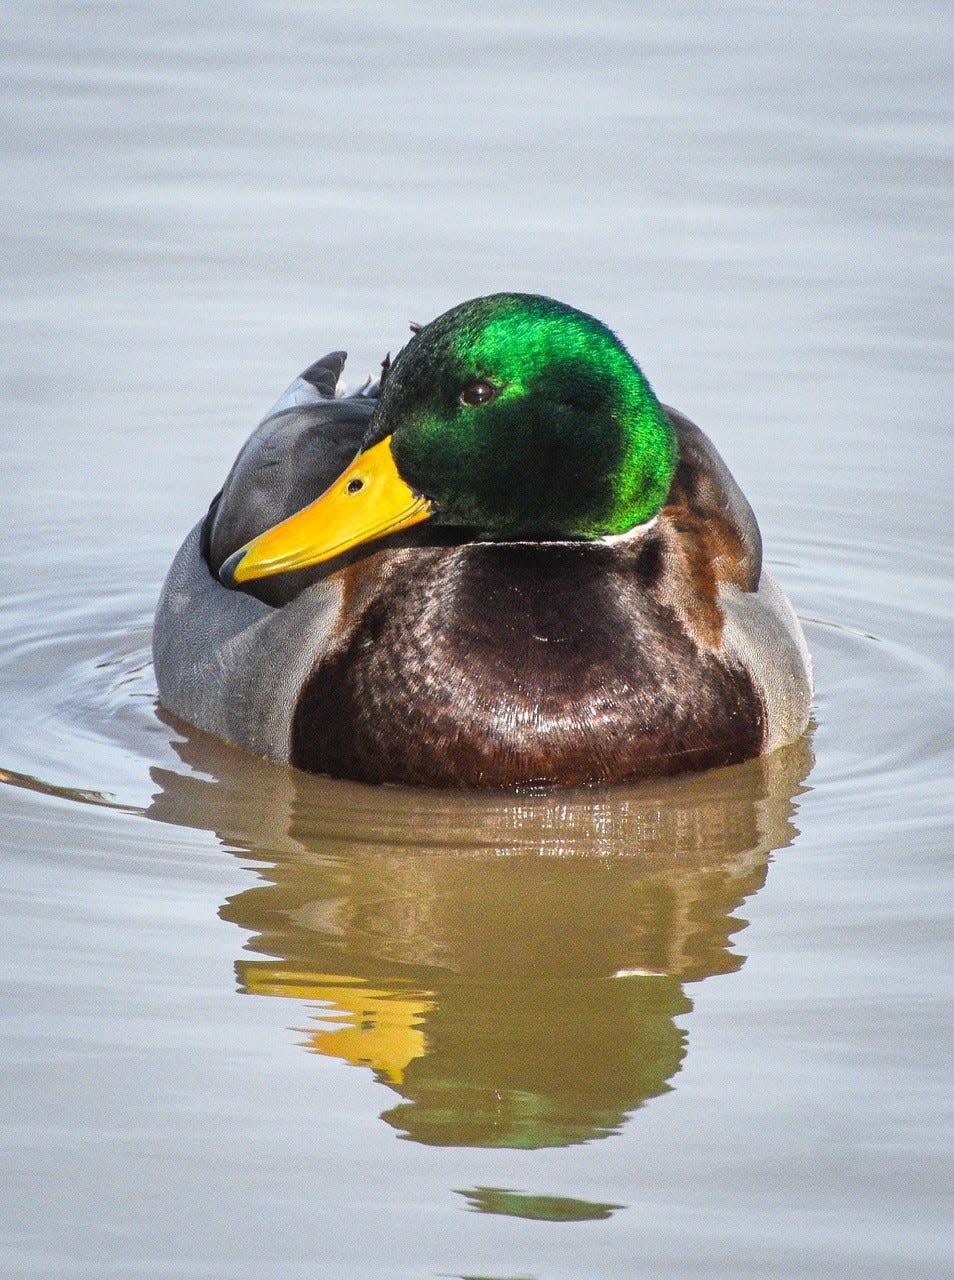 Birding can be fun and productive in winter in Ohio, where more than 40 species of waterfowl can be found, including mallards at Clyde Community Park.